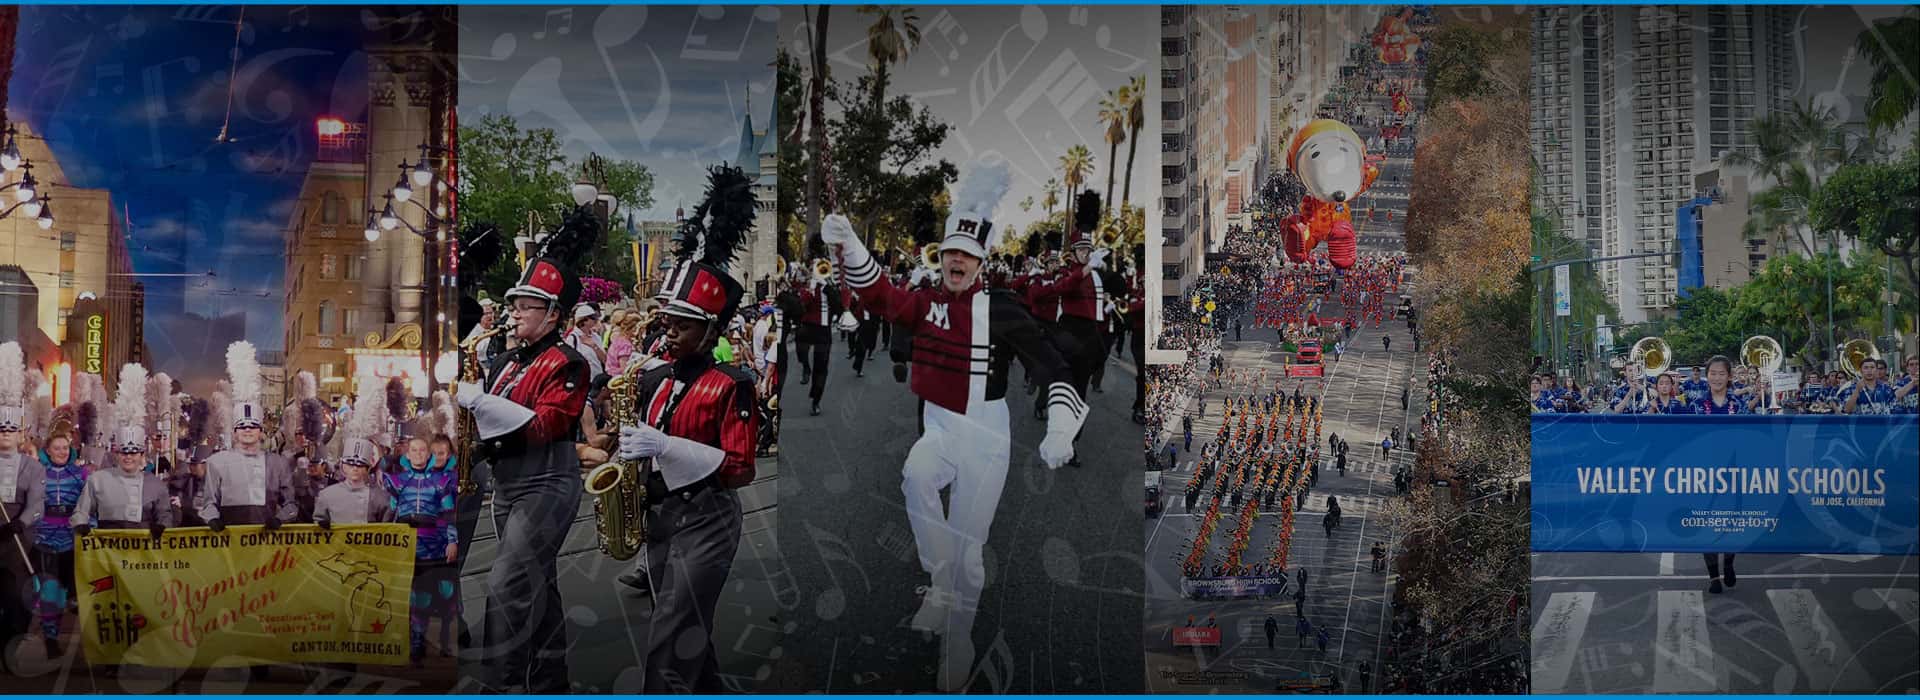 Marching band parades for the finest performing arts programs in the world.